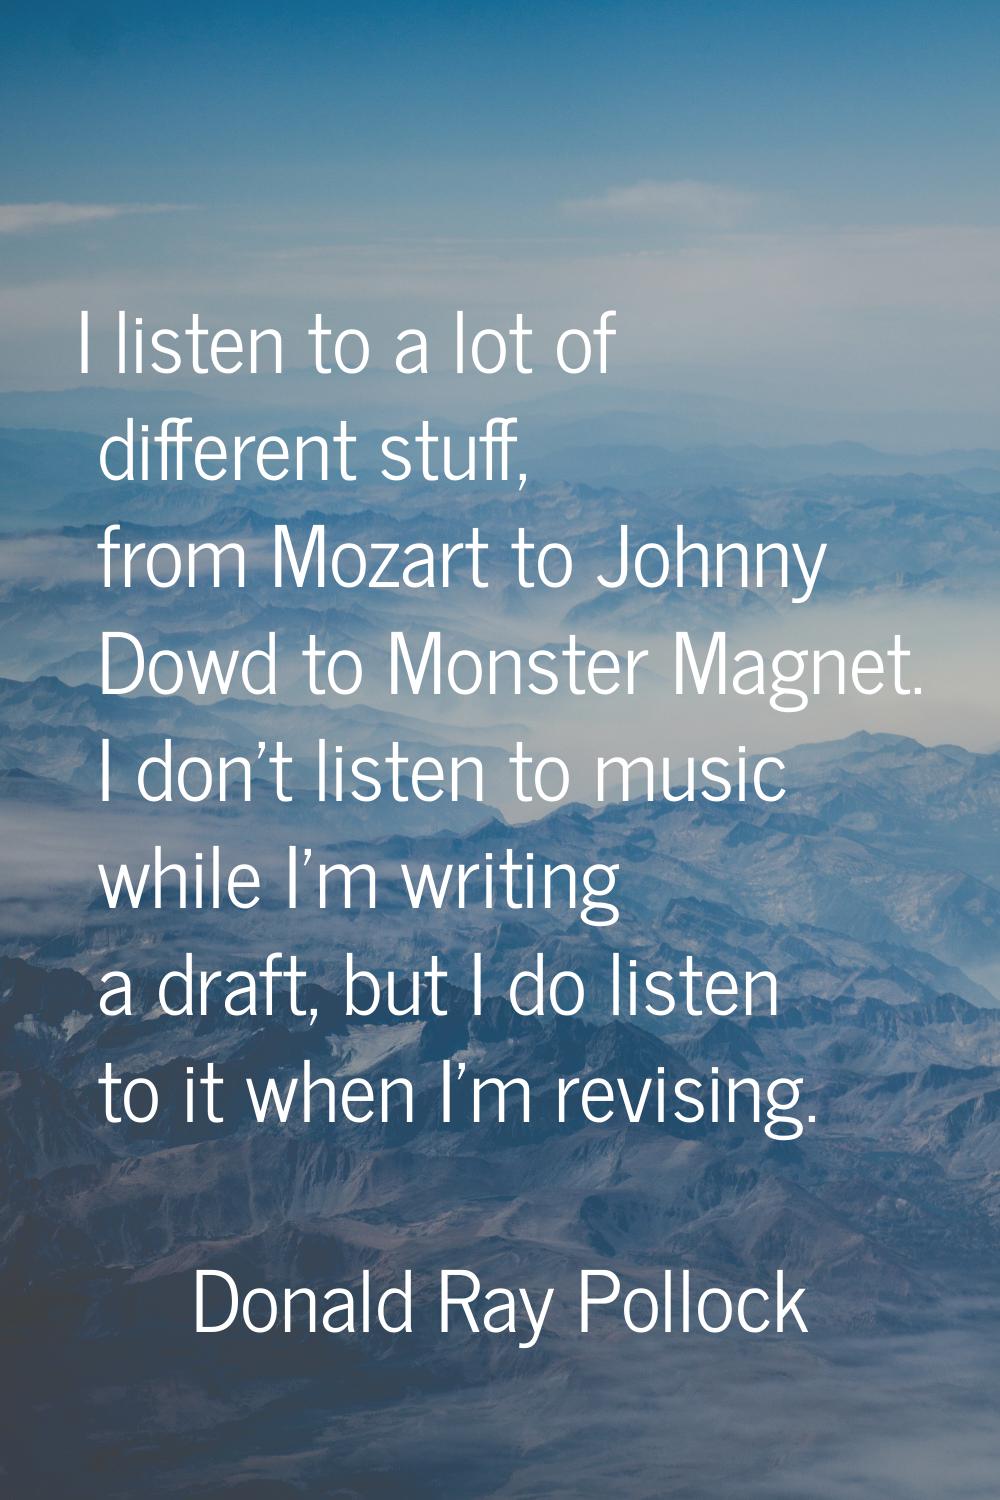 I listen to a lot of different stuff, from Mozart to Johnny Dowd to Monster Magnet. I don't listen 